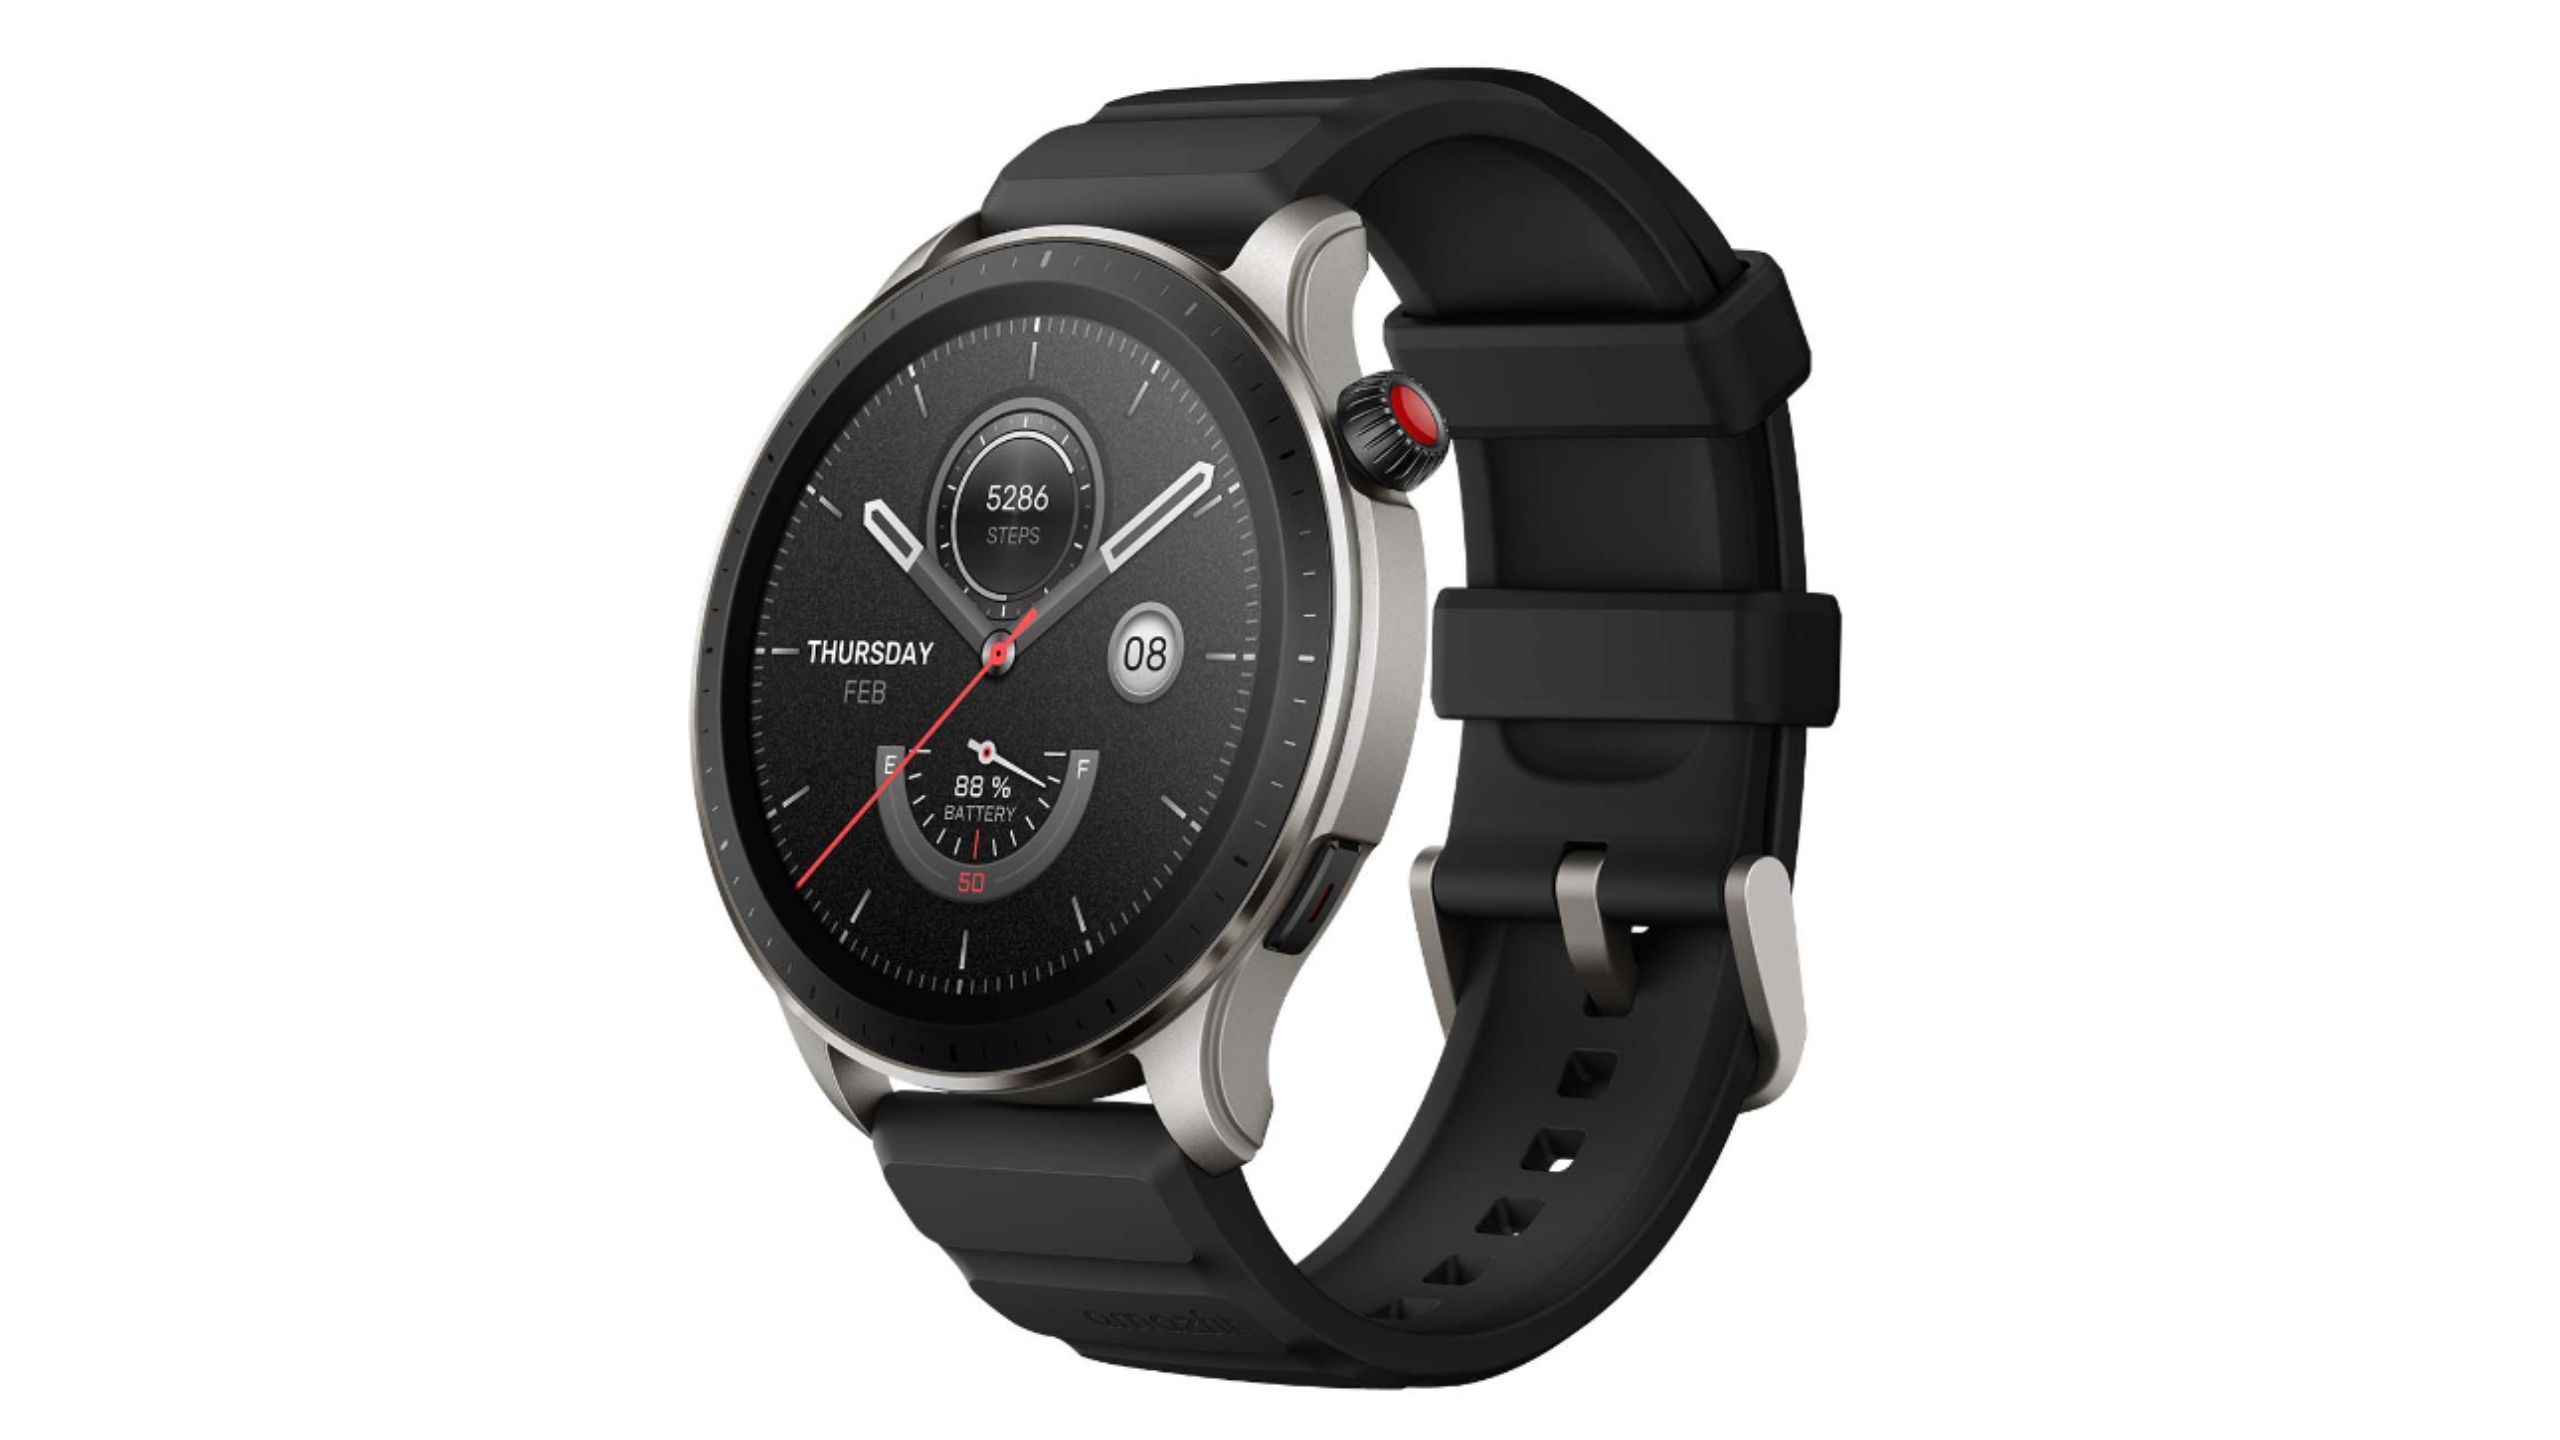 Amazfit Smartwatches - Smartwatch for Less